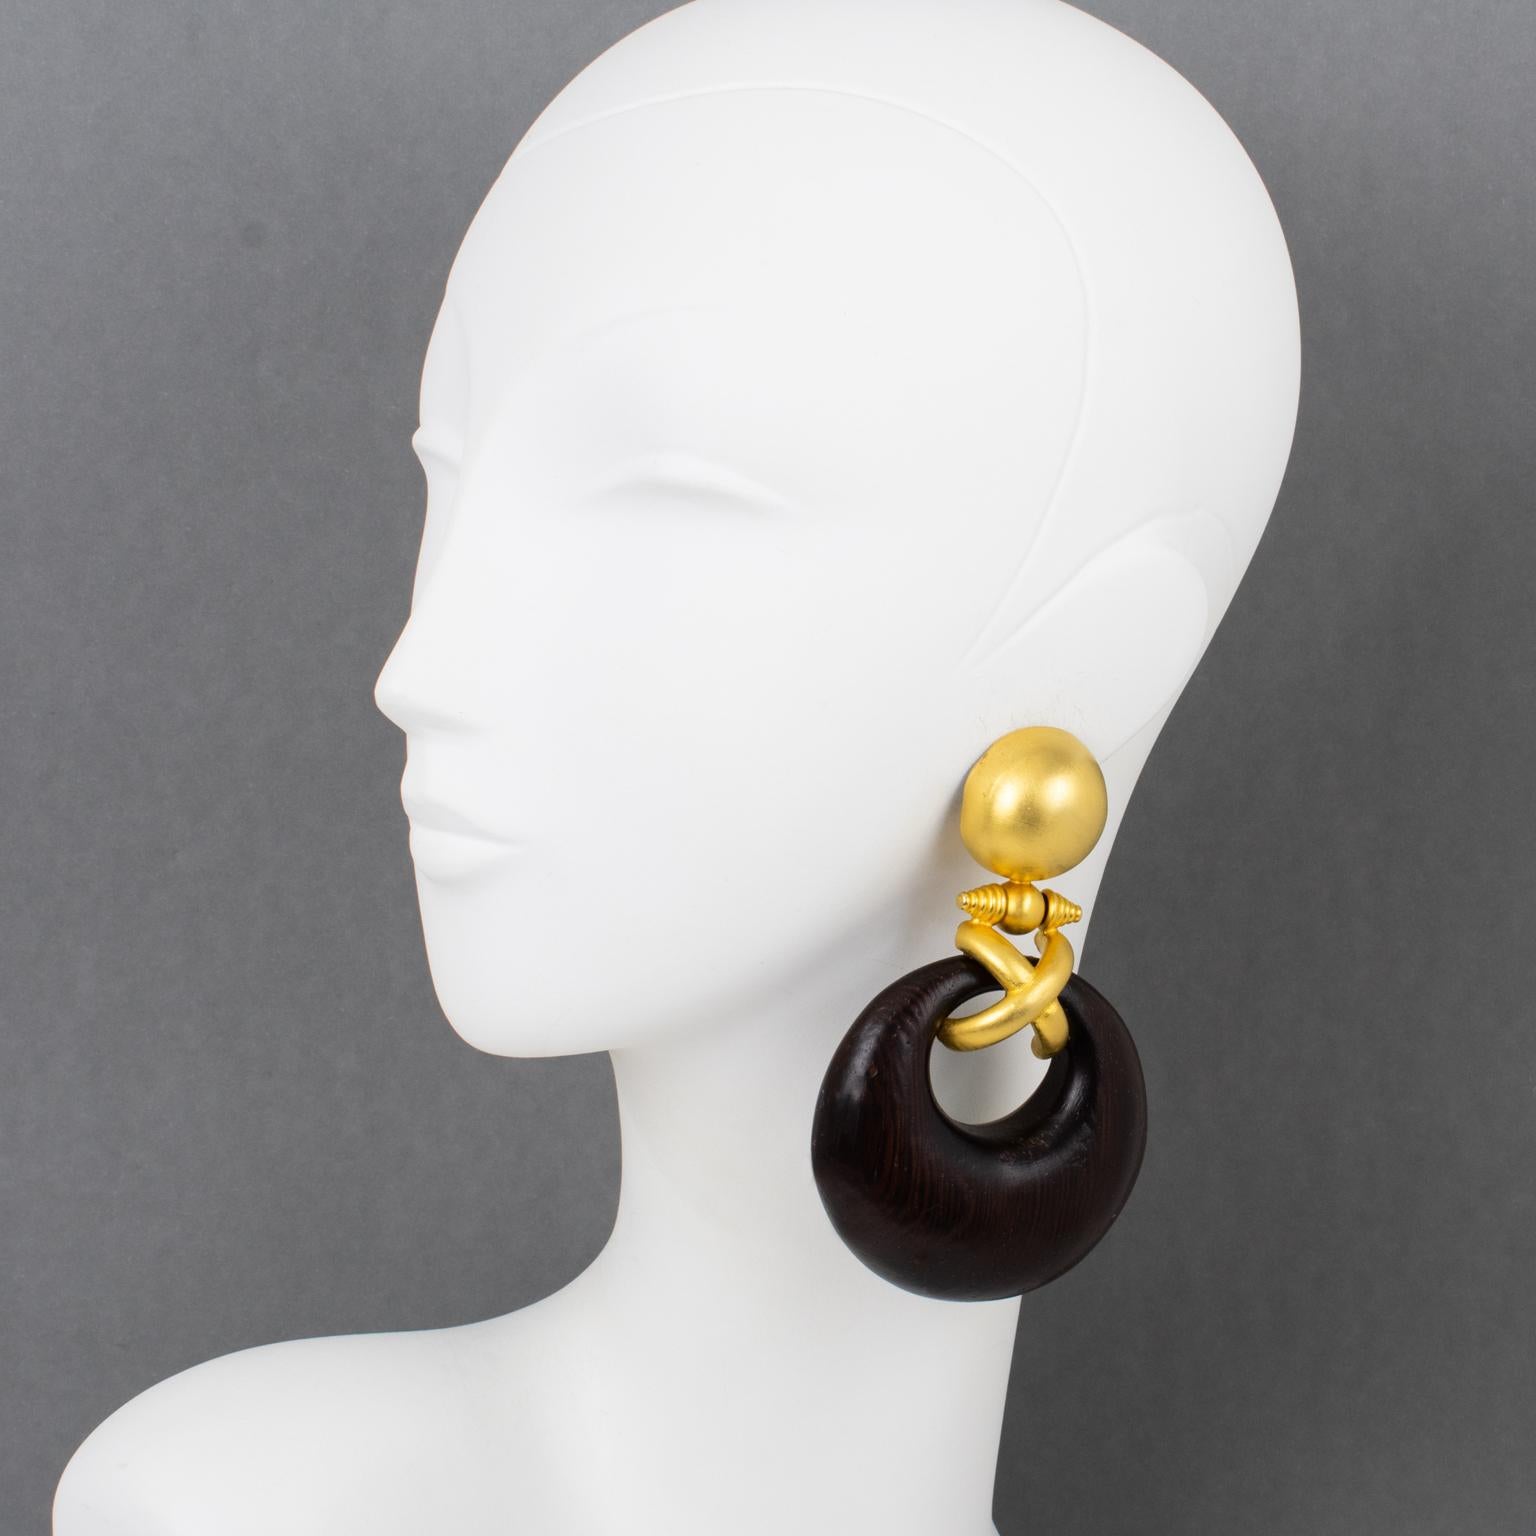 Italian designer Gianfranco Ferre created these spectacular couture clip-on earrings in the 1990s. The oversized shoulder duster design boasts a door-knocker shape with gilded metal in a semi-mat finish aspect, complimented with tropical wood